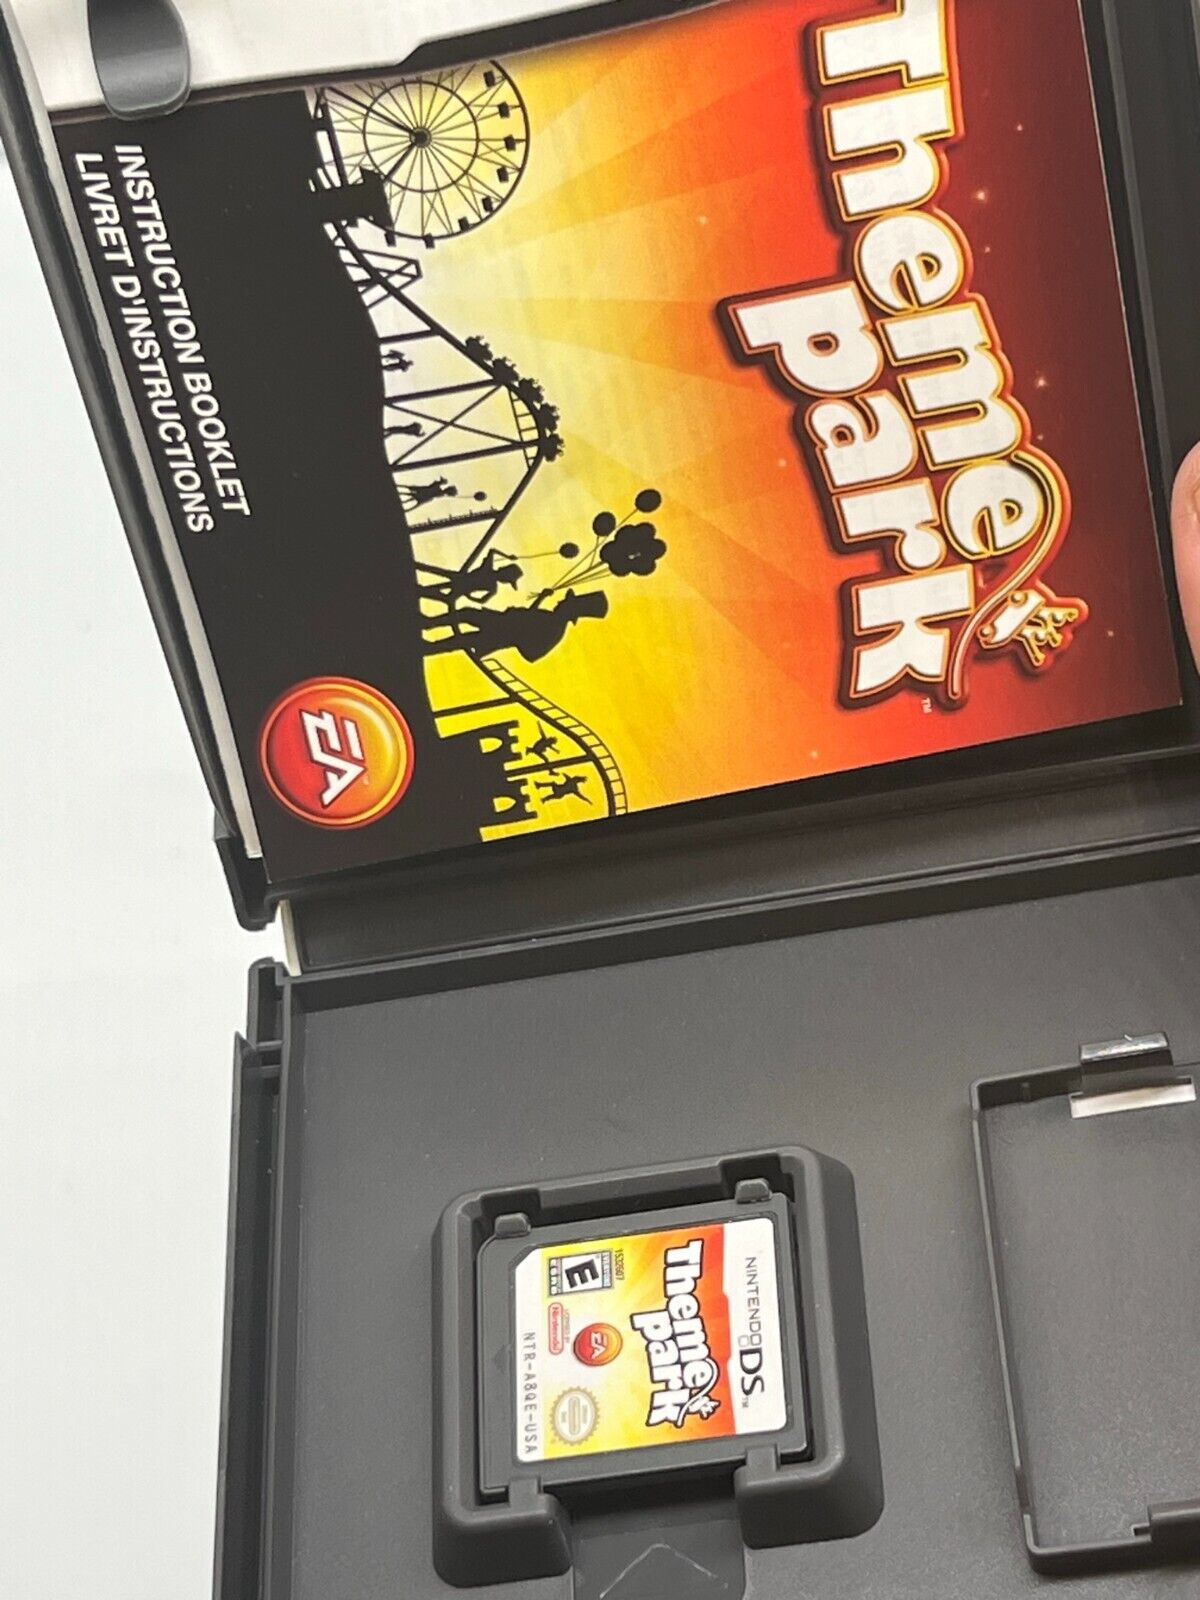 Theme Park (Nintendo DS, 2007) - Tested